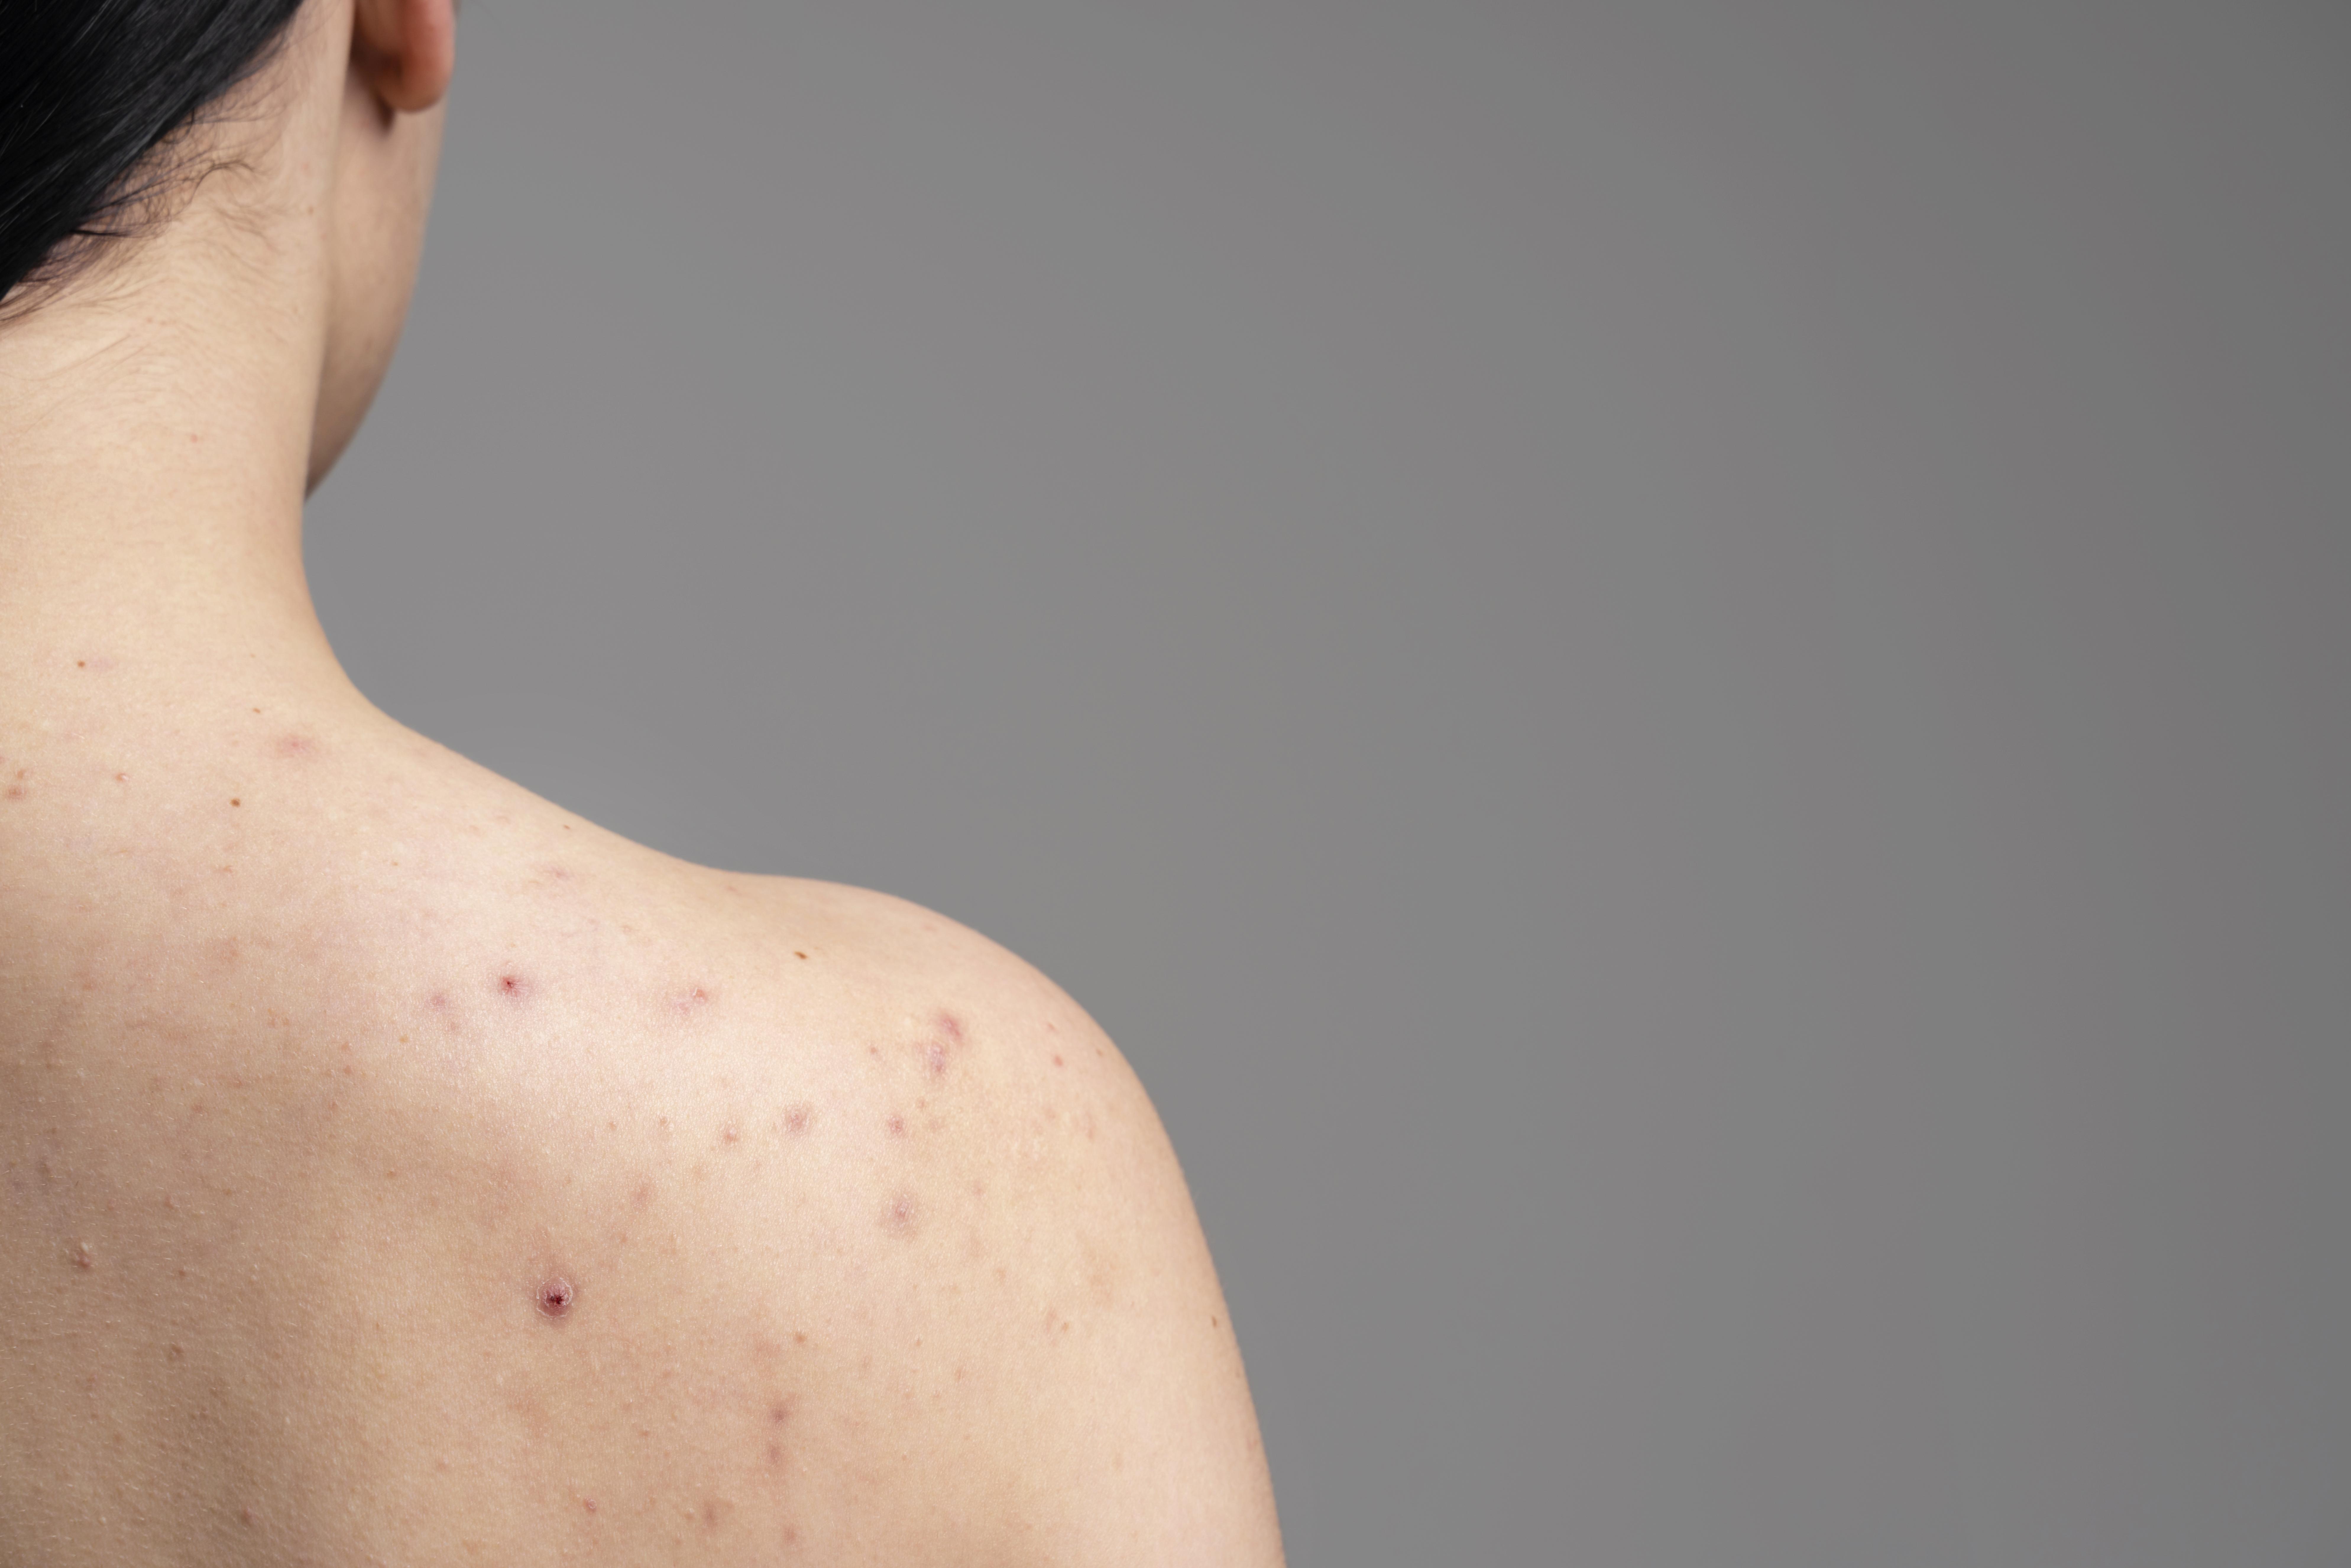 Folliculitis: What Is, Causes, Symptoms, Treatment, and Prevention